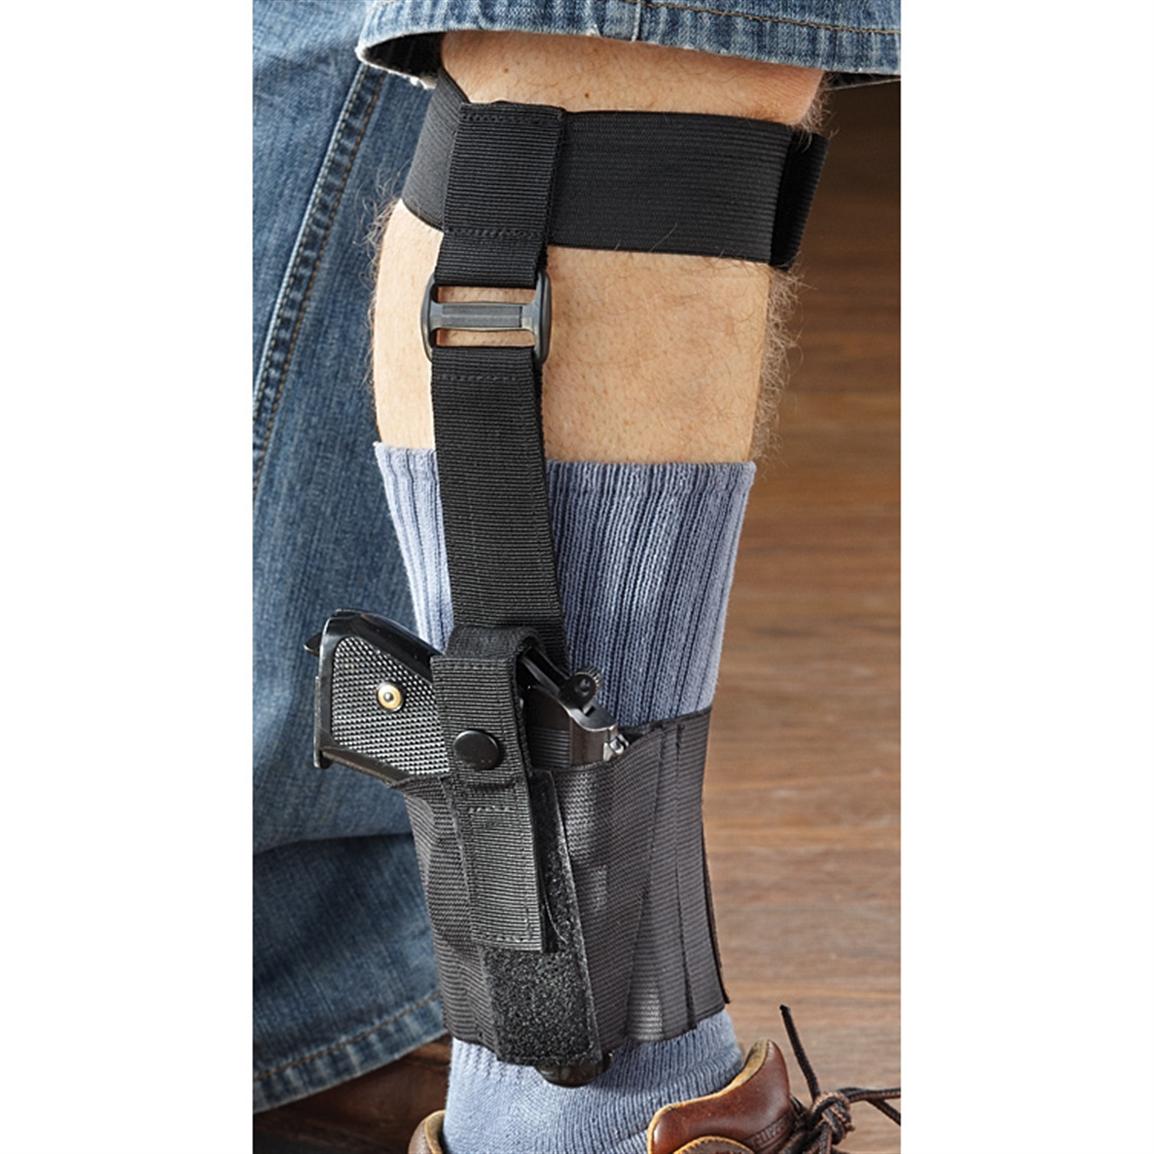 Fox Tactical Small Frame Ankle Holster - 208287, Holsters at Sportsman's Guide